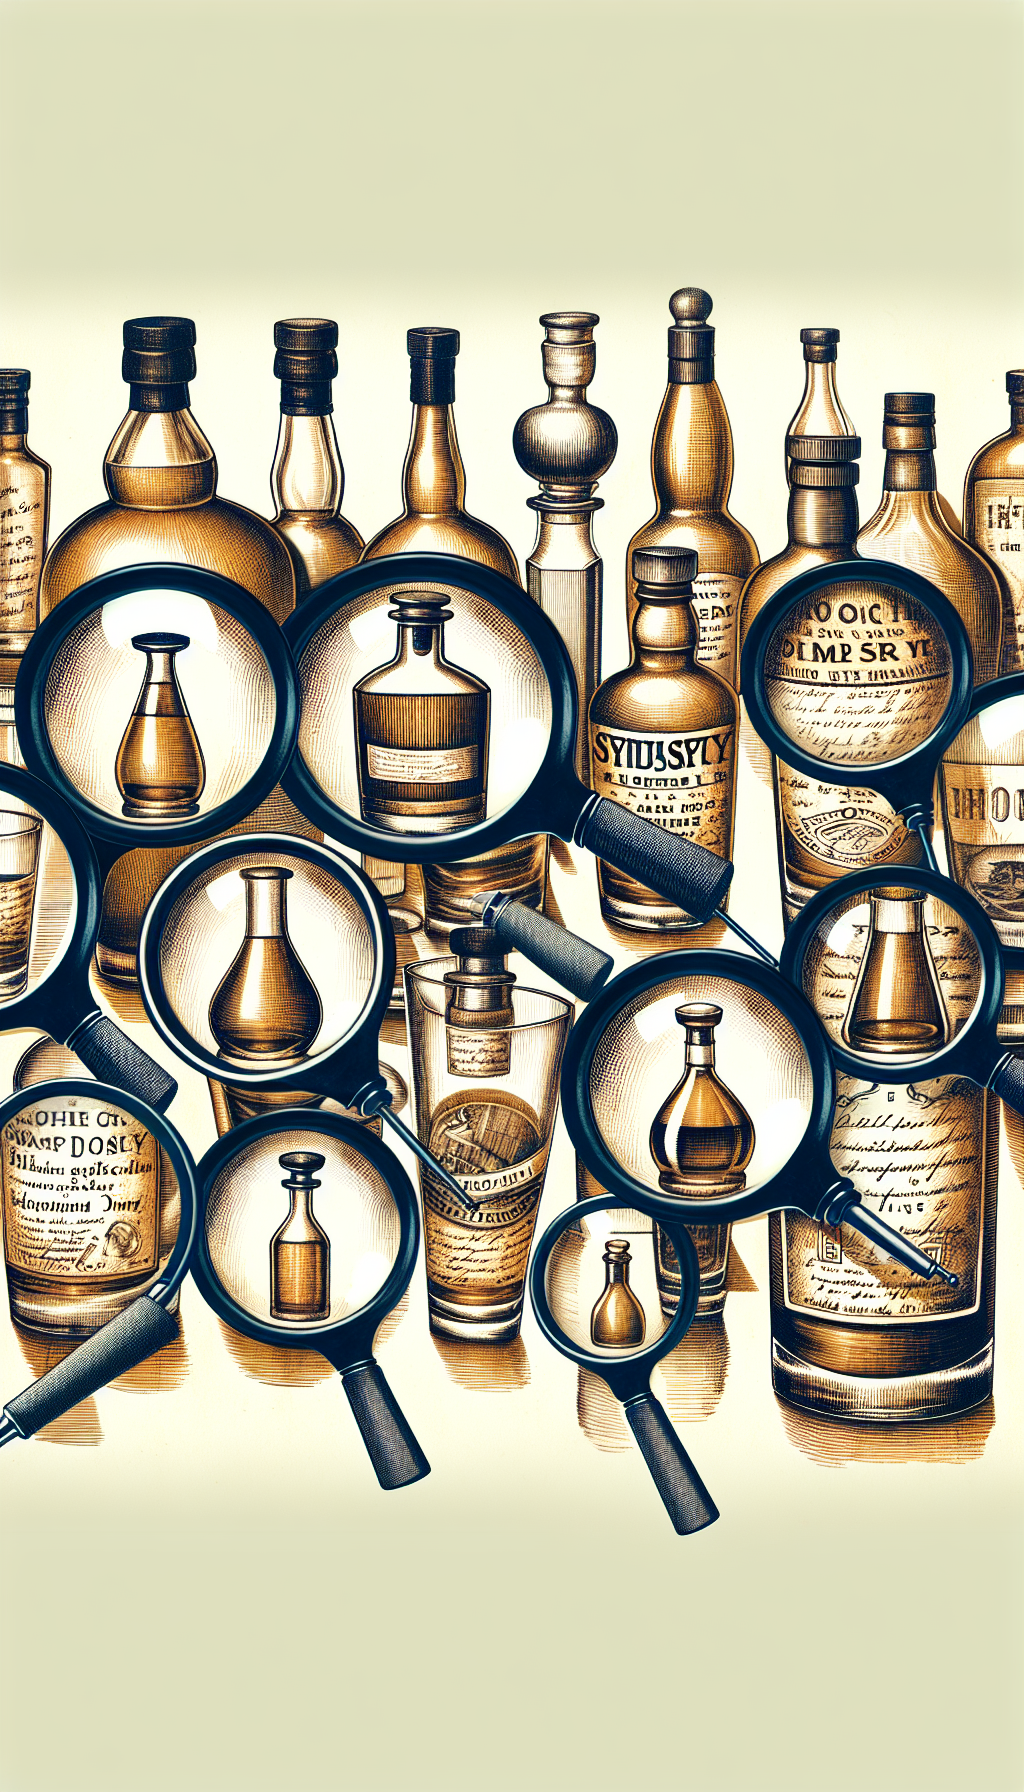 A whimsical montage of spectacled eyes magnifying vintage whiskey bottles of various shapes—rectangular, cylindrical, pot-still—each labeled with etched-style text indicating their era. The illustration intertwines realistic and sketch-like elements, using sepia tones and glass-reflection visuals to evoke the old-timey feel, while the magnifying theme emphasizes the identification aspect of the post.